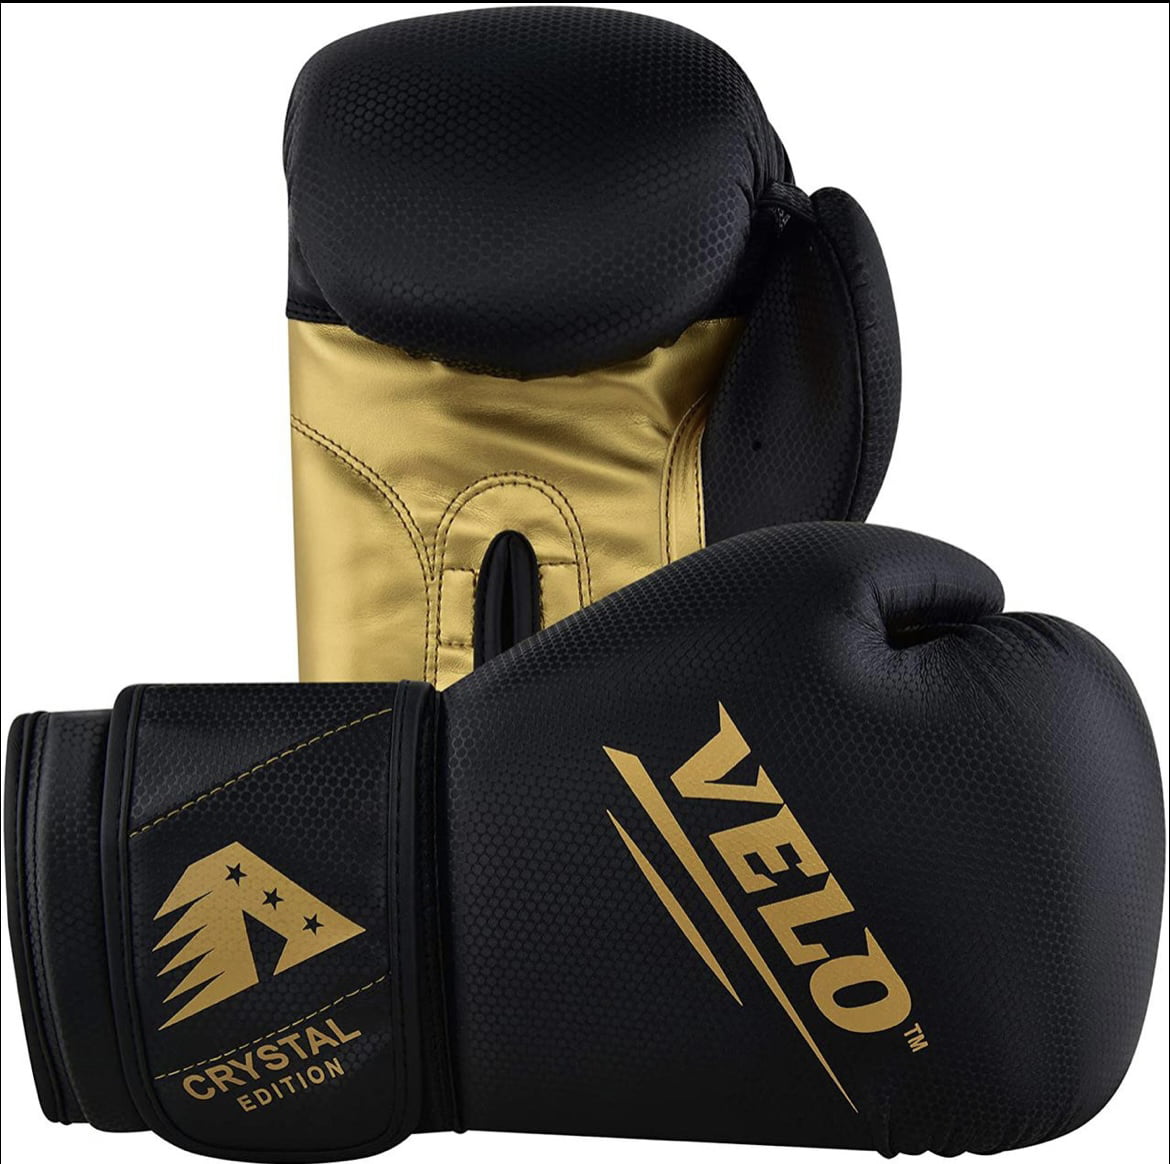 VELO Crystal Leather Boxing Gloves Fight Punch Kickboxing Muay thai Sparring 